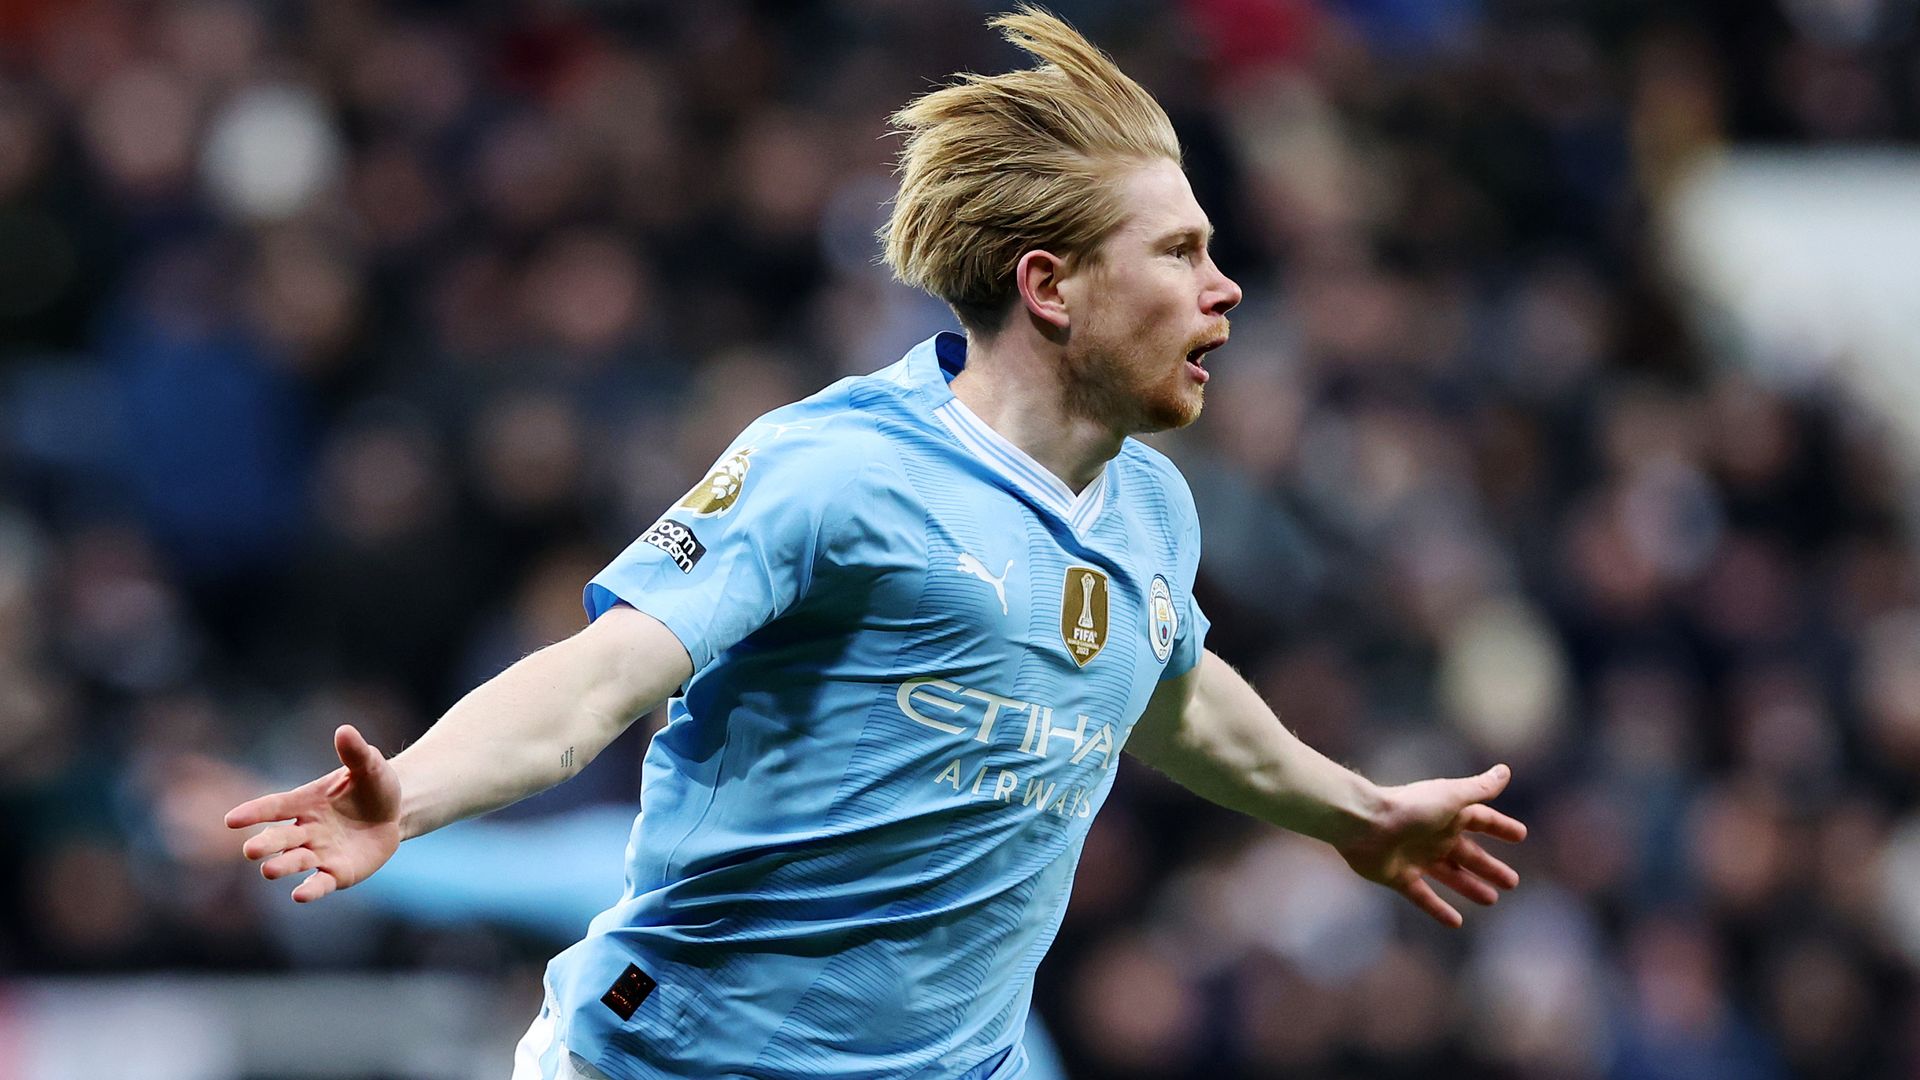 De Bruyne's masterful cameo inspires Man City to dramatic win at Newcastle